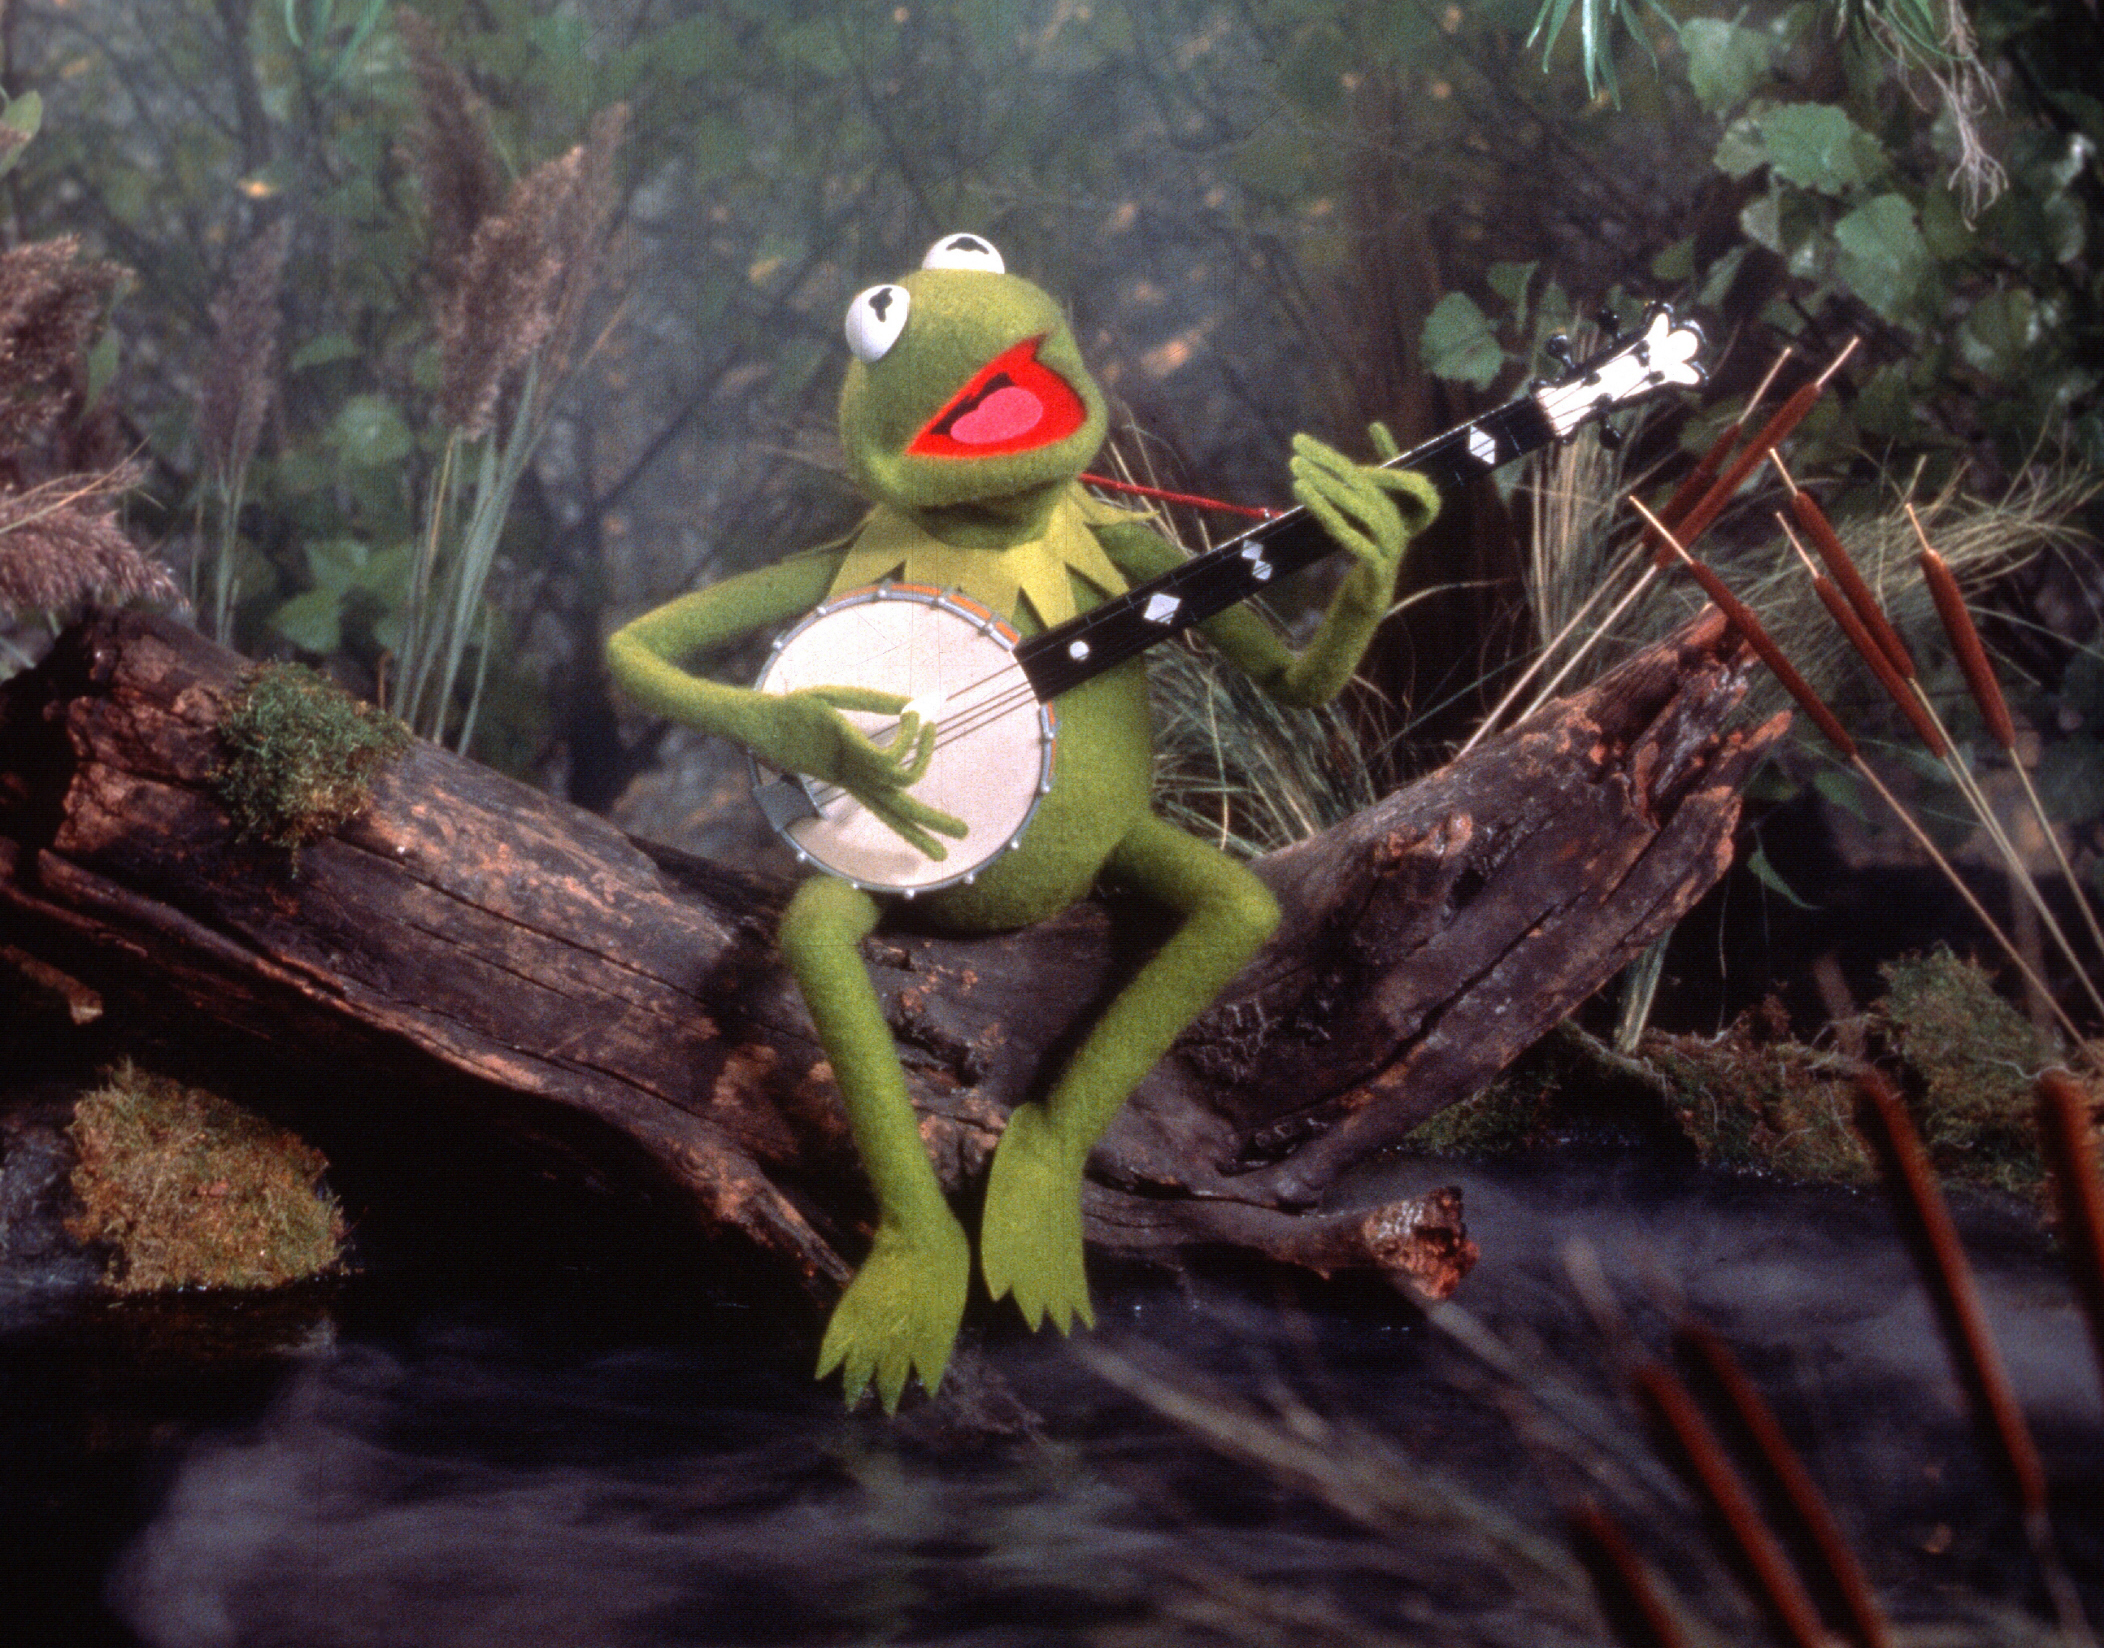 Kermit the Frog in The Muppet Movie.